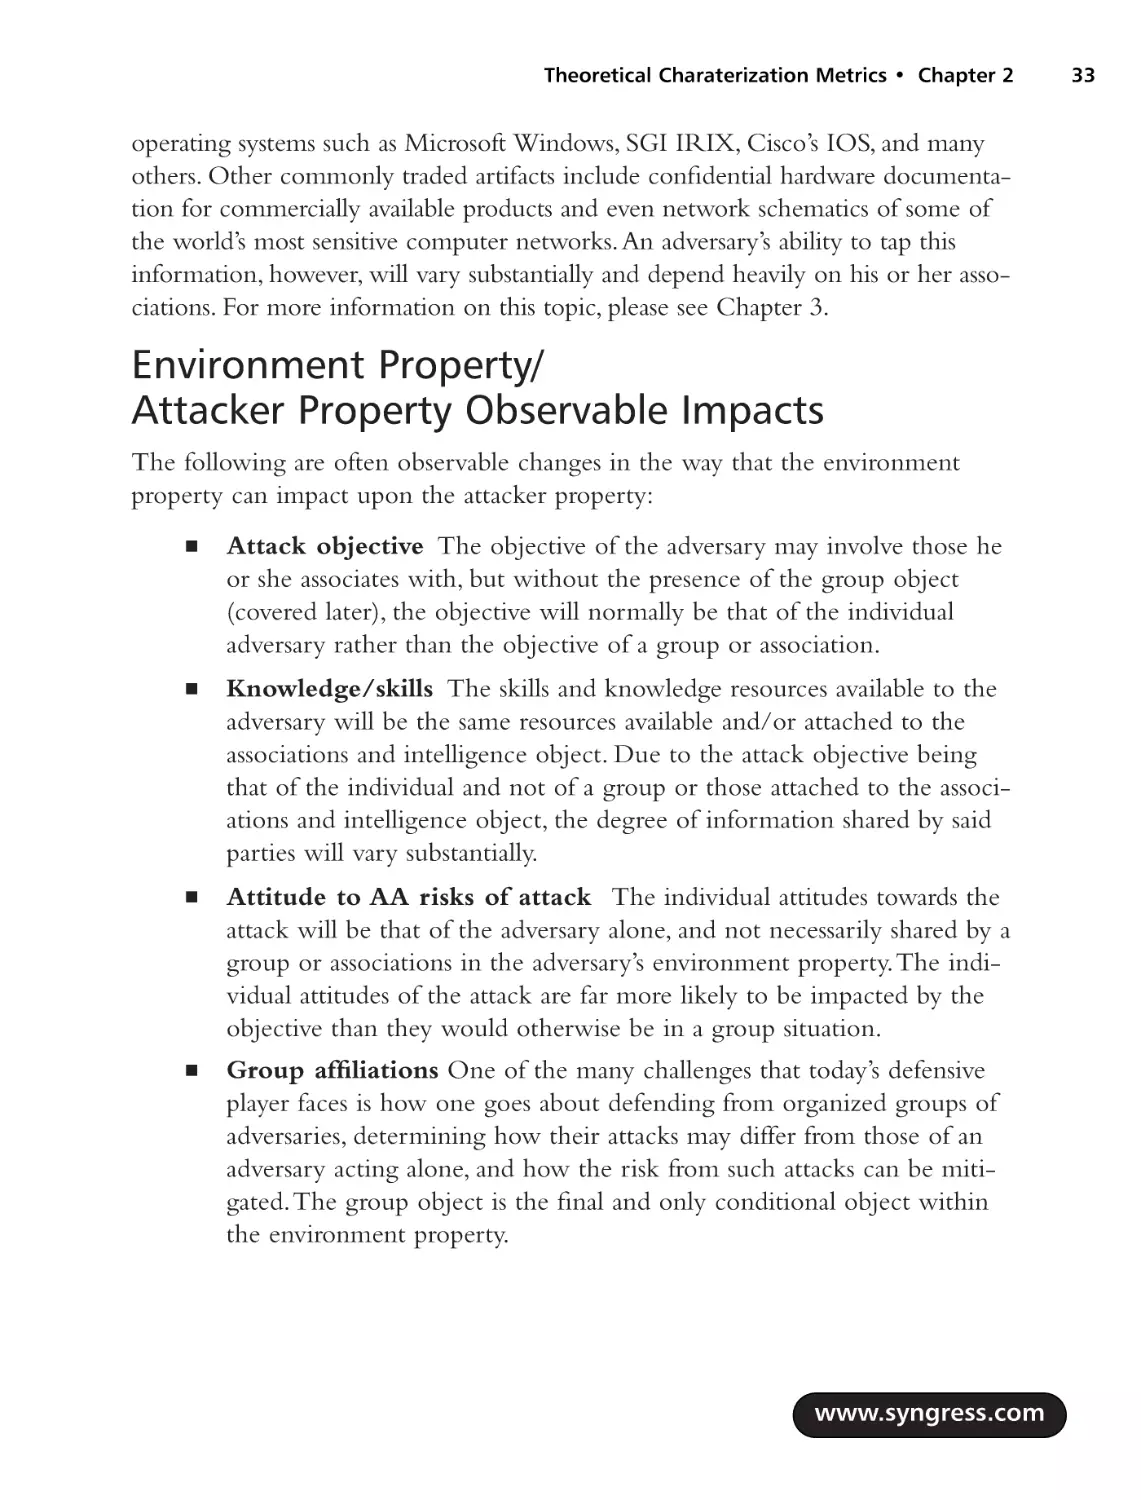 Environment Property/Attacker Property Observable Impacts